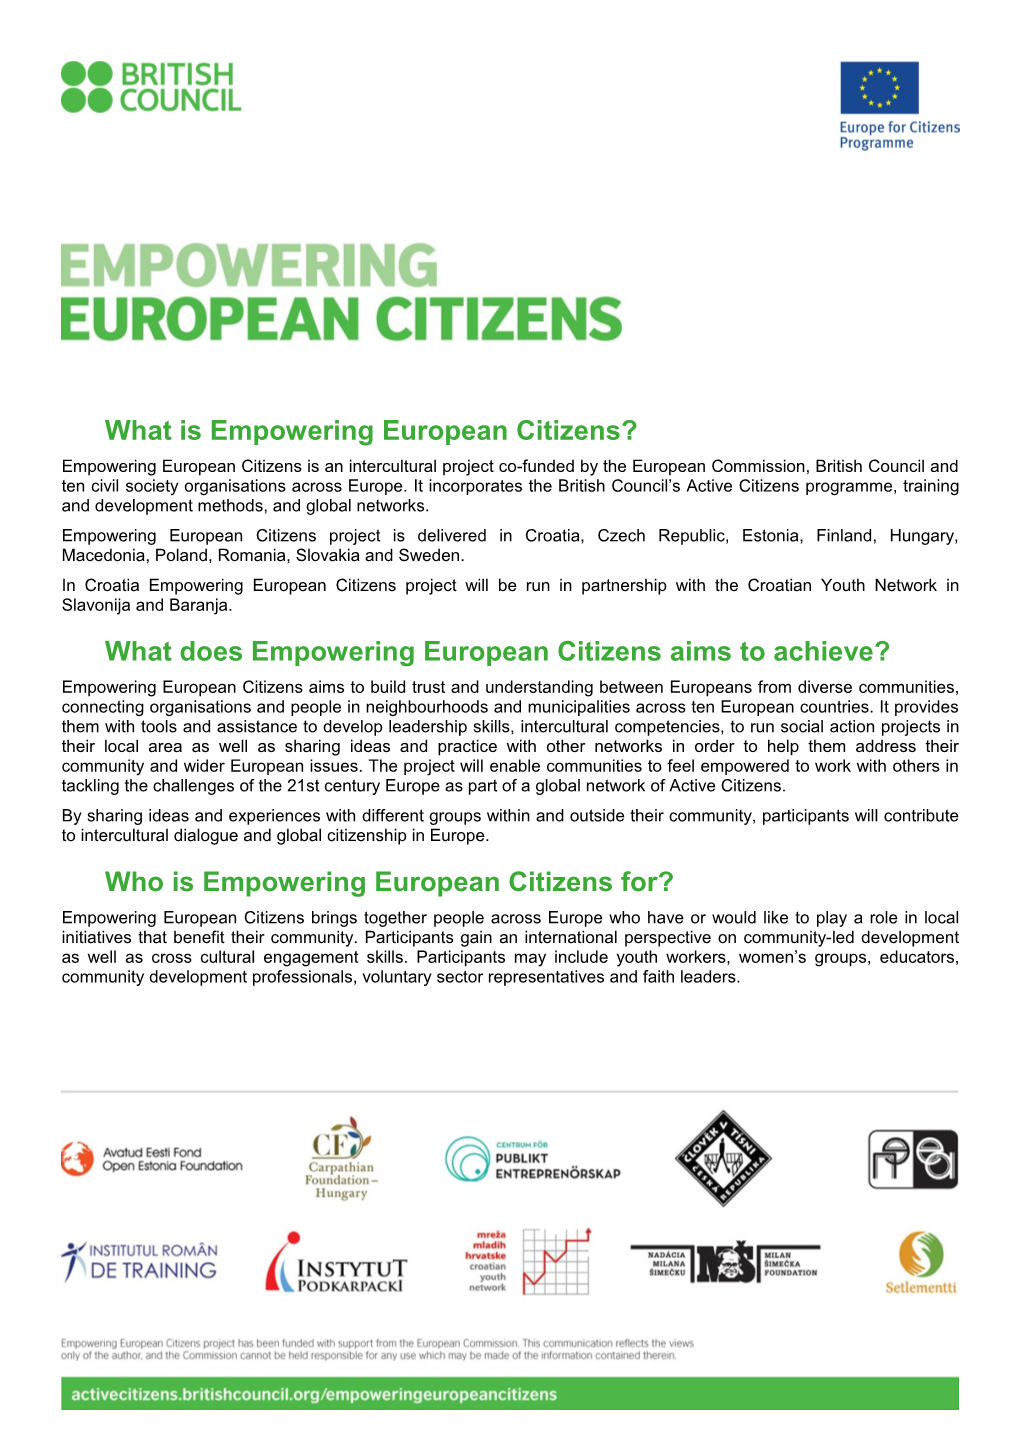 What Is Empowering European Citizens?